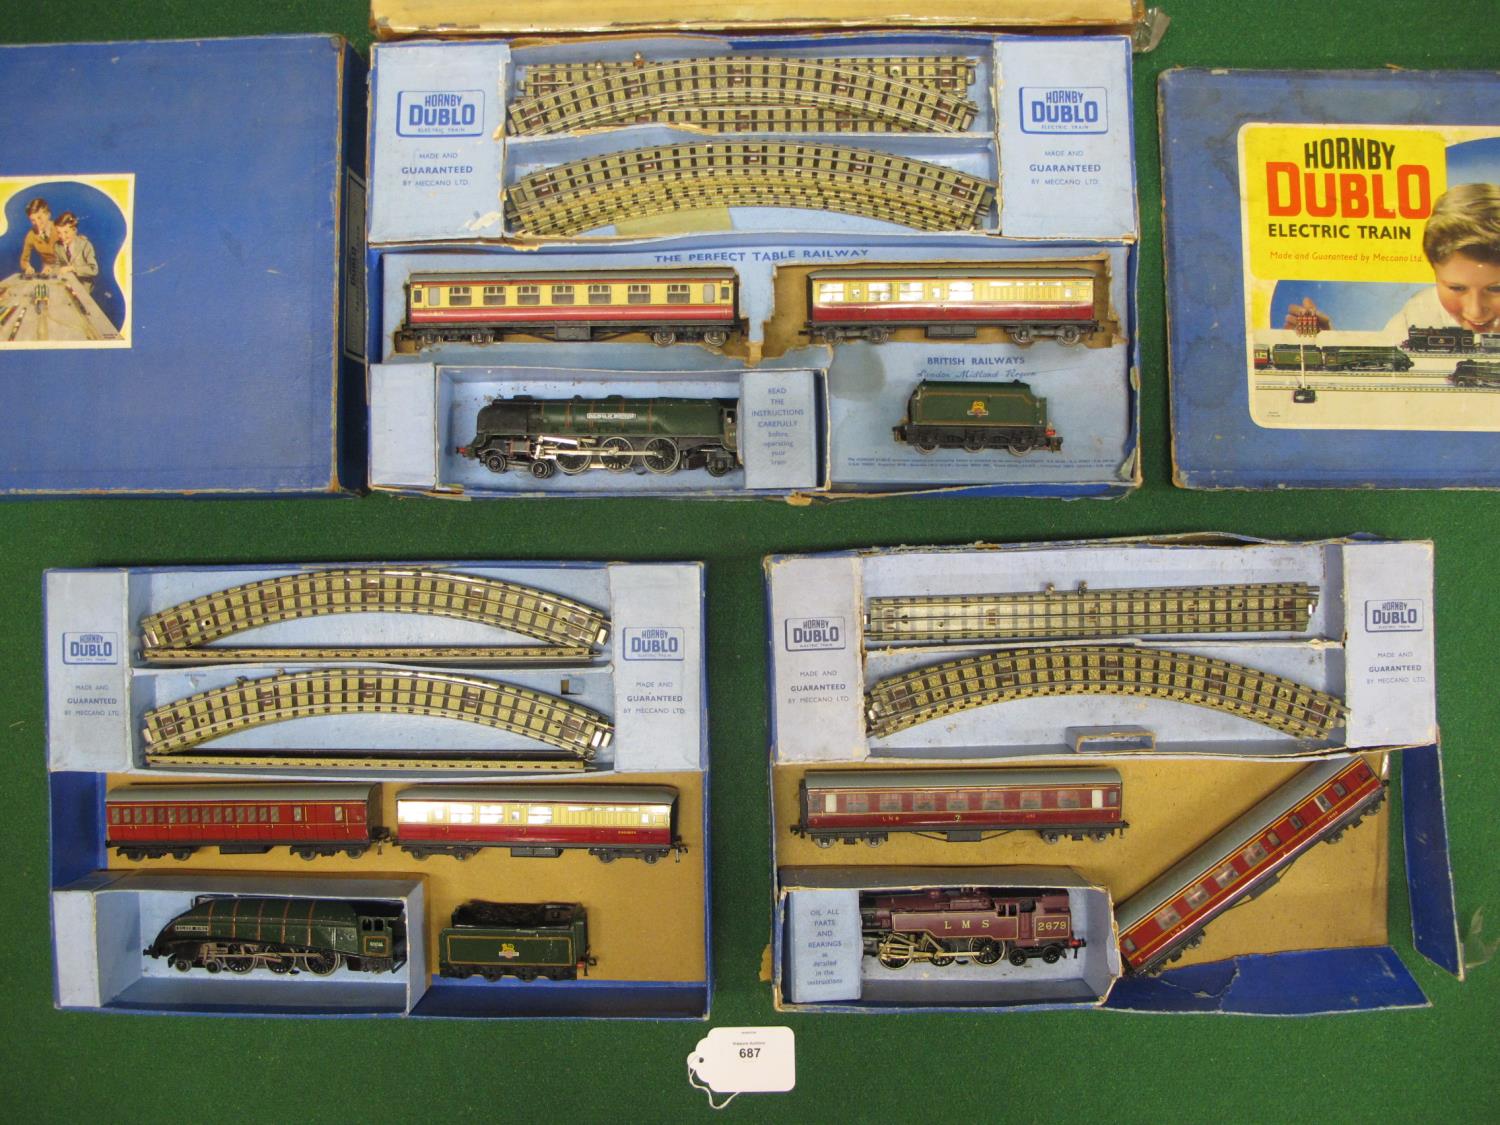 Three HD mis-matched 3 Rail train sets, in rough boxes, containing: track, six coaches, tender